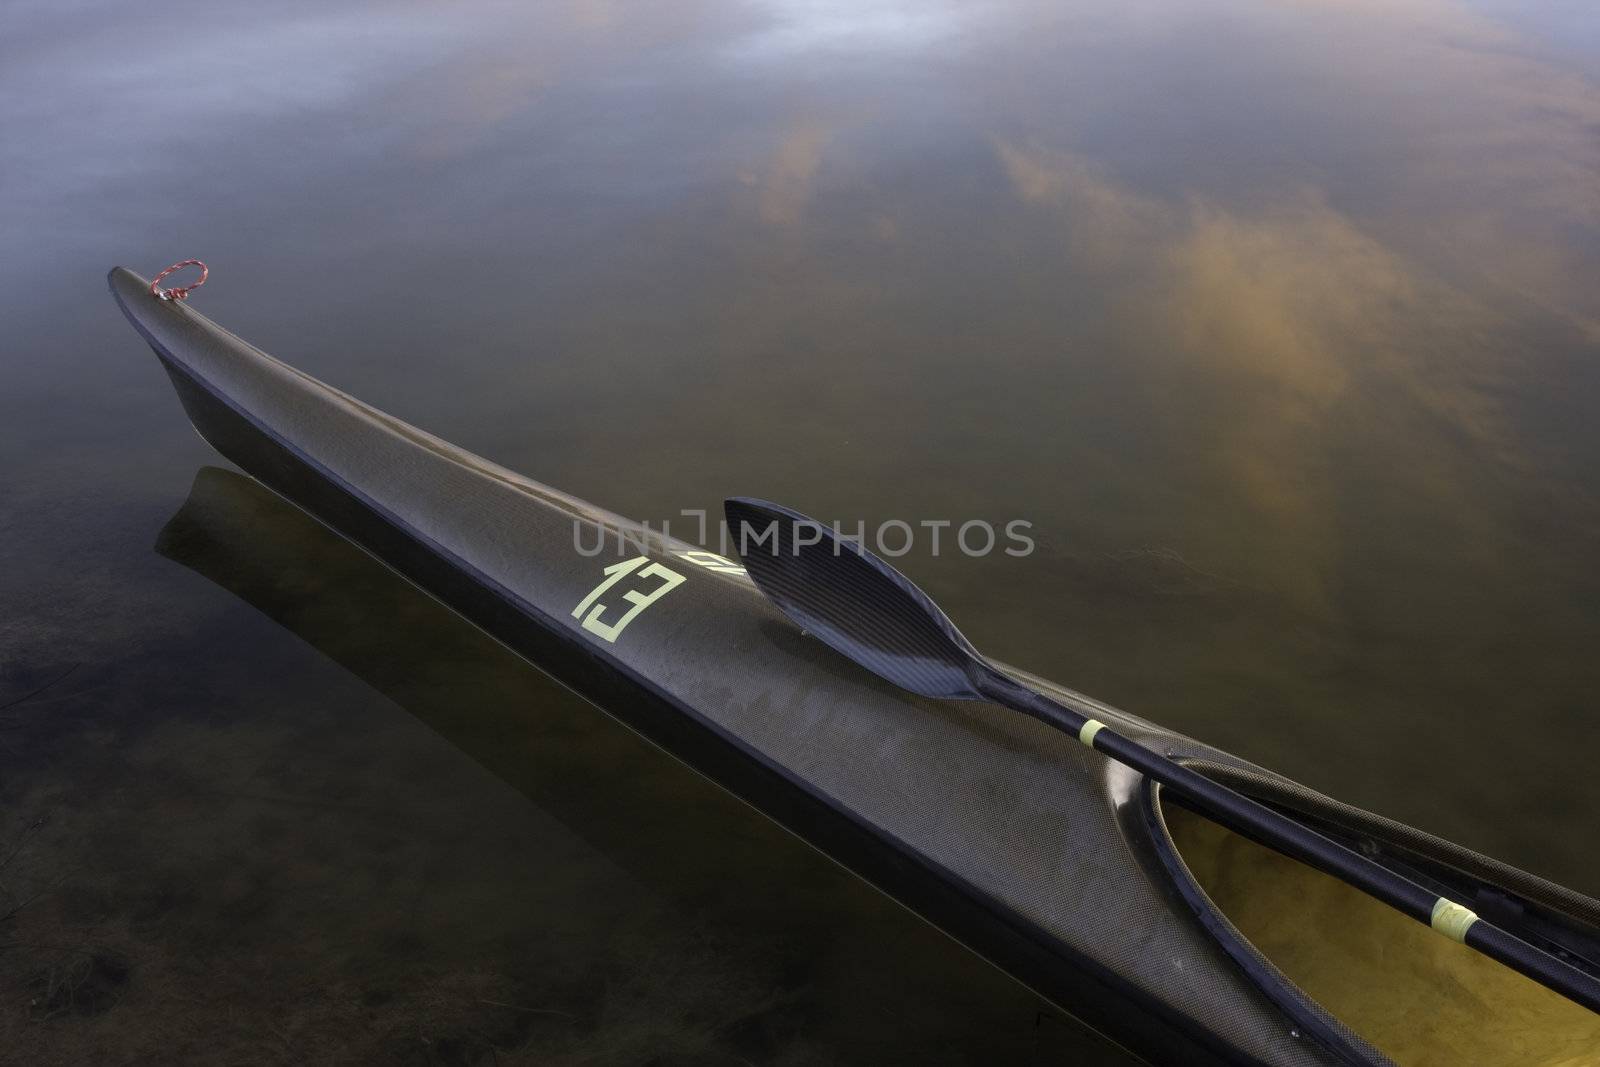 bow of sea racing kayak (lightweight and slim carbon kevlar fiber design) with a wing paddle across cockpit on calm water with cloud reflections, temporary racing number 13 on front deck, wet after paddling

l

eightweight carbon kevlar racing sea kayak with wing paddle on a front deck 